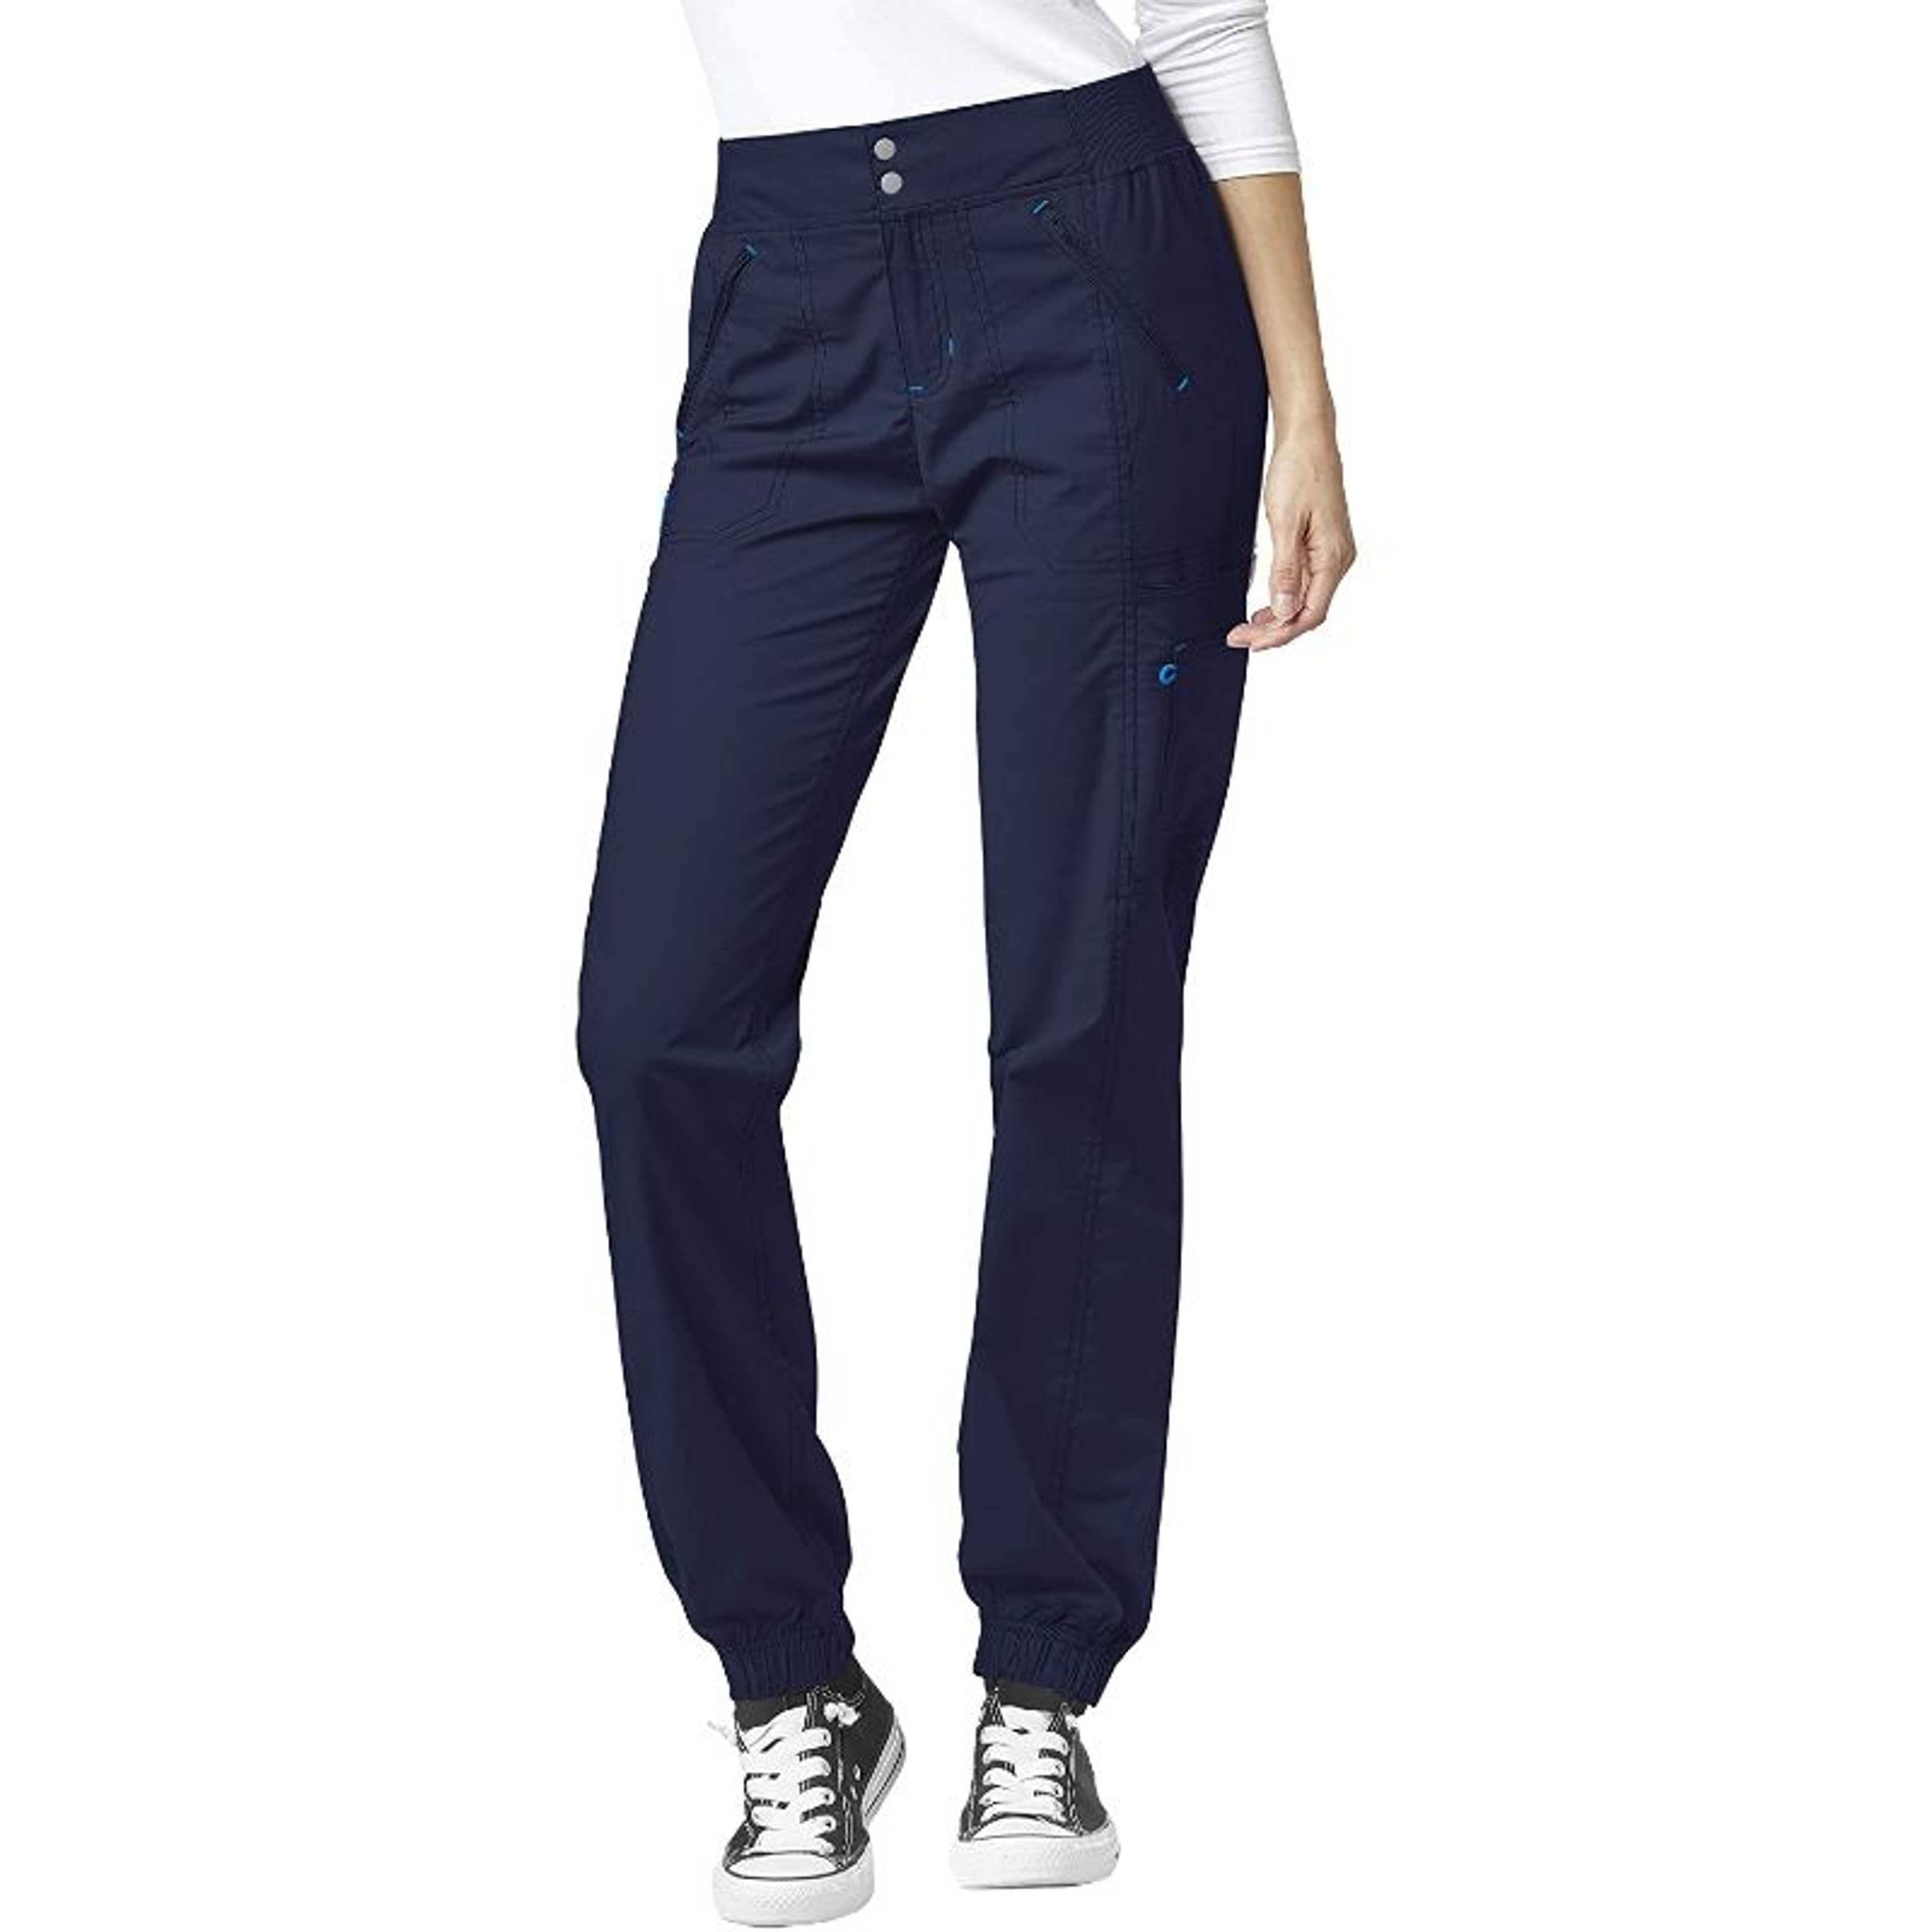 Navy Rubahas Womens Cargo Trousers Ladies Trousers Jeans Pants